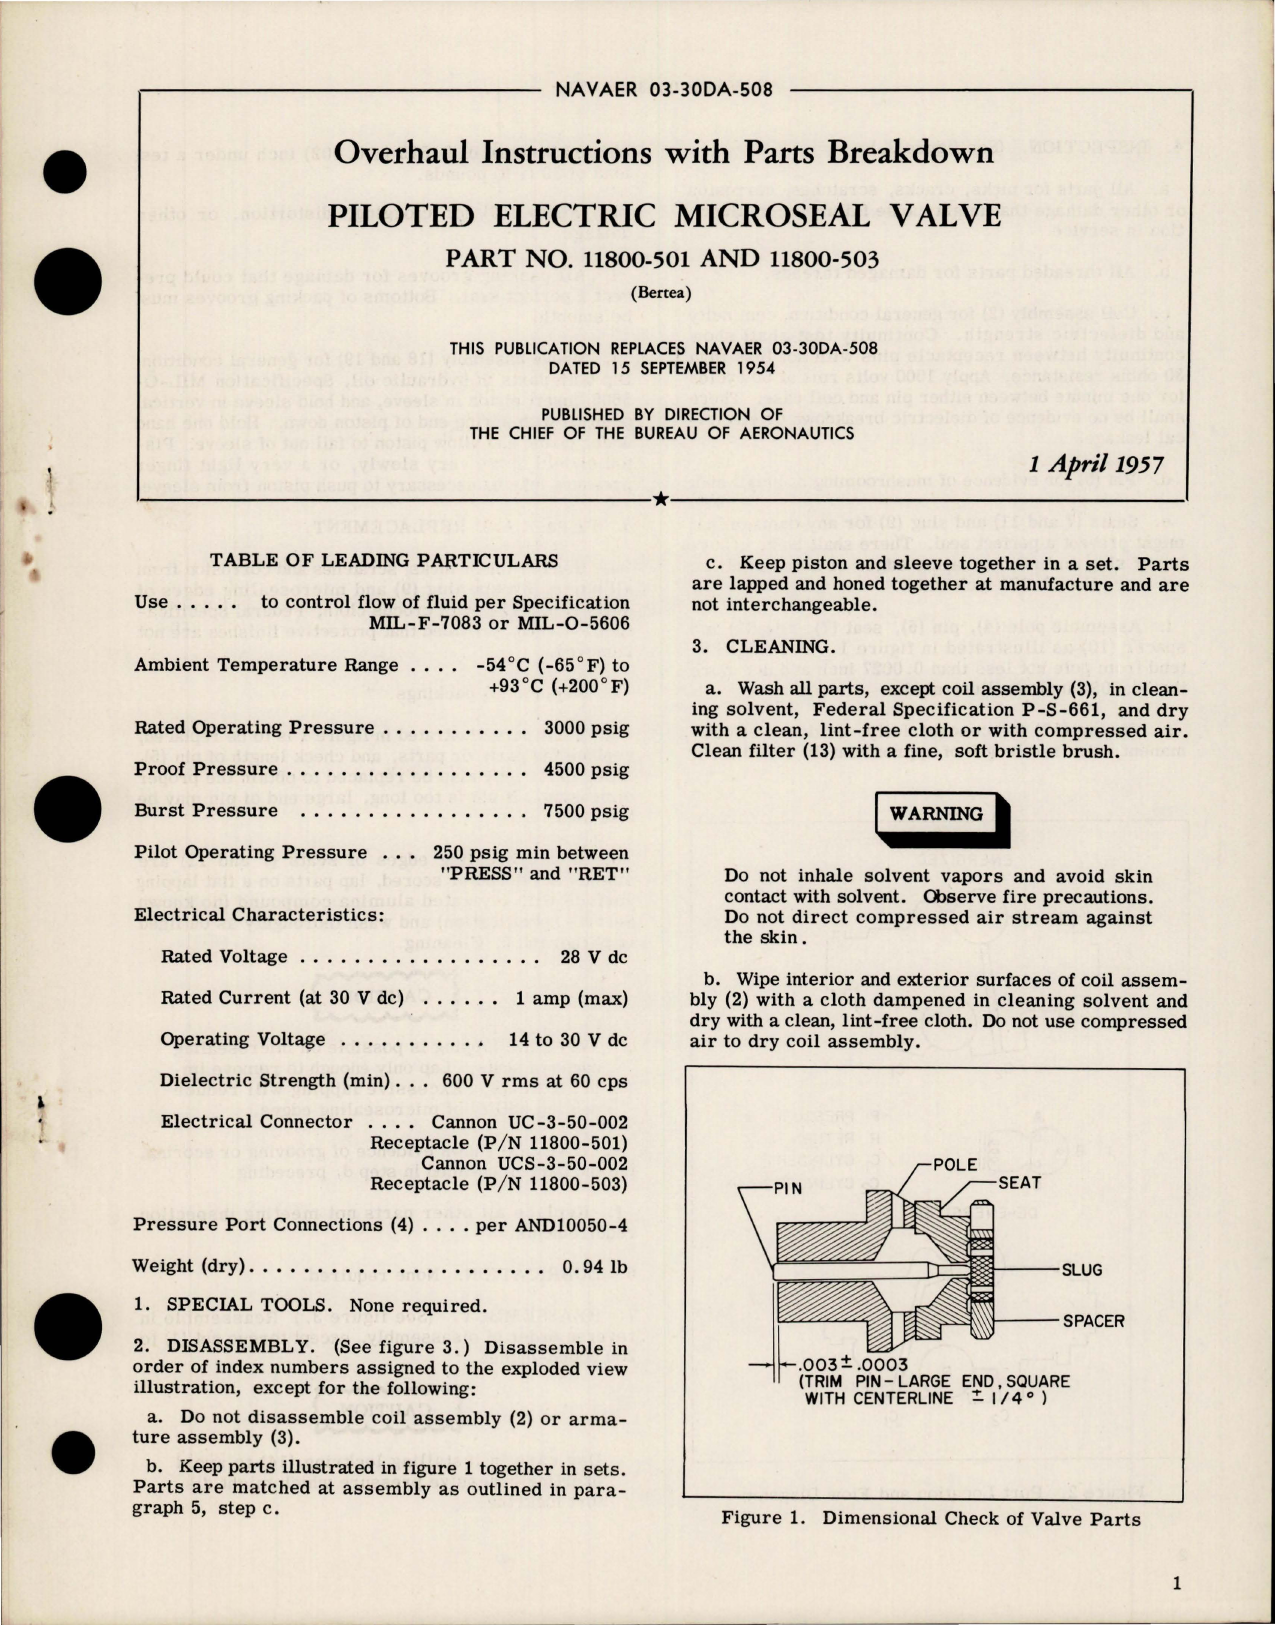 Sample page 1 from AirCorps Library document: Overhaul Instructions with Parts for Piloted Electric Microseal Valve - Part 11800-501, 11800-503 